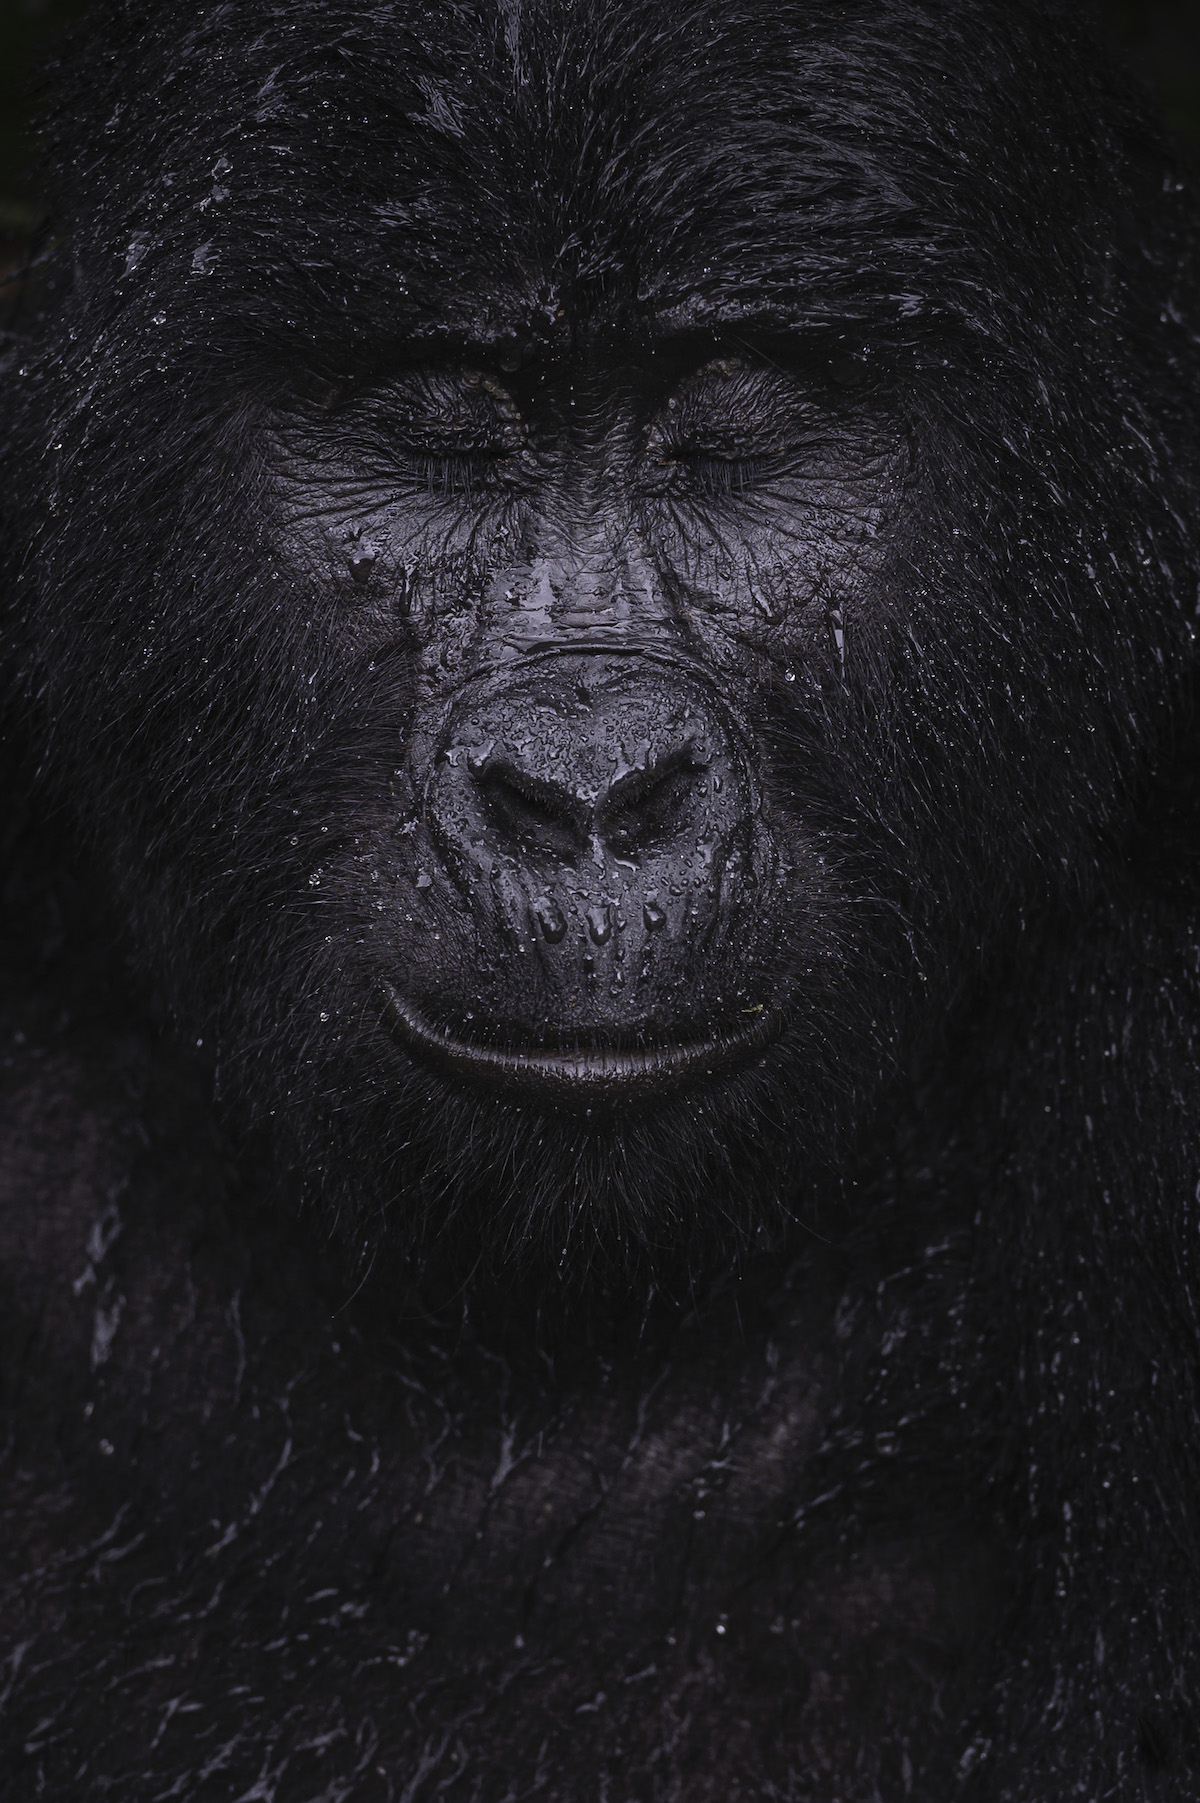 Portrait of a Mountain Gorilla Closing Its Eyes